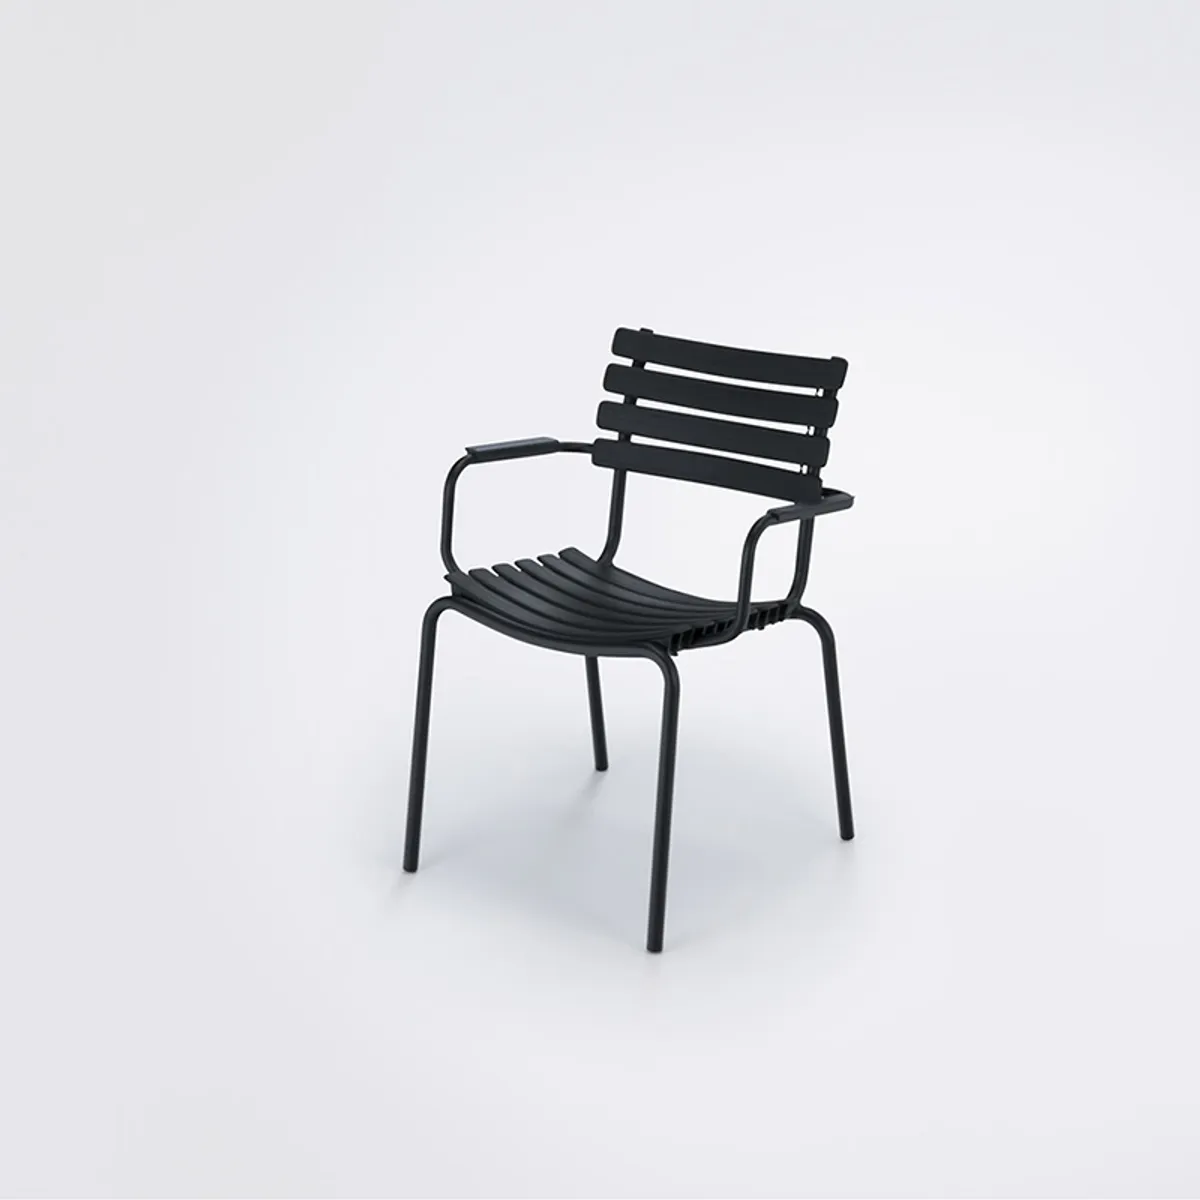 Snip Chair Metal And Plastic Outdoor Chair For Hotels And Cafe Gardens 349